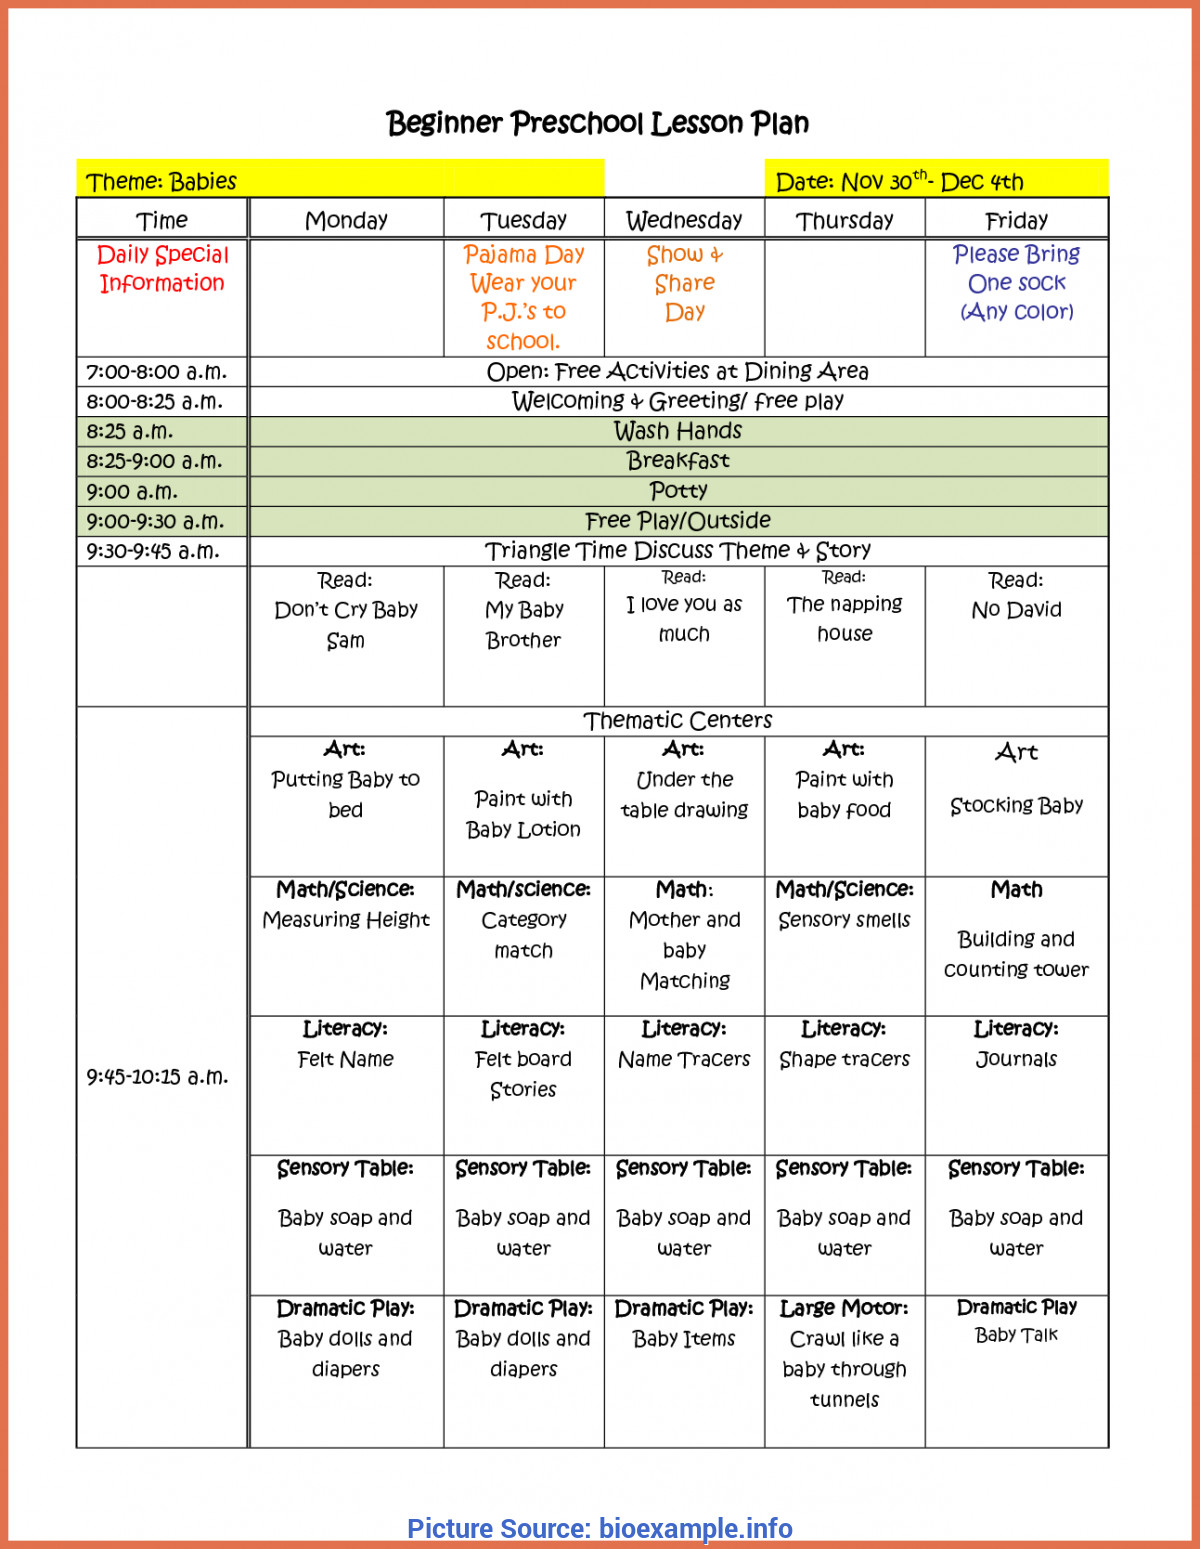 Lesson Plan Template Pdf Briliant Preschool Weekly themes for the Year Summer Camp